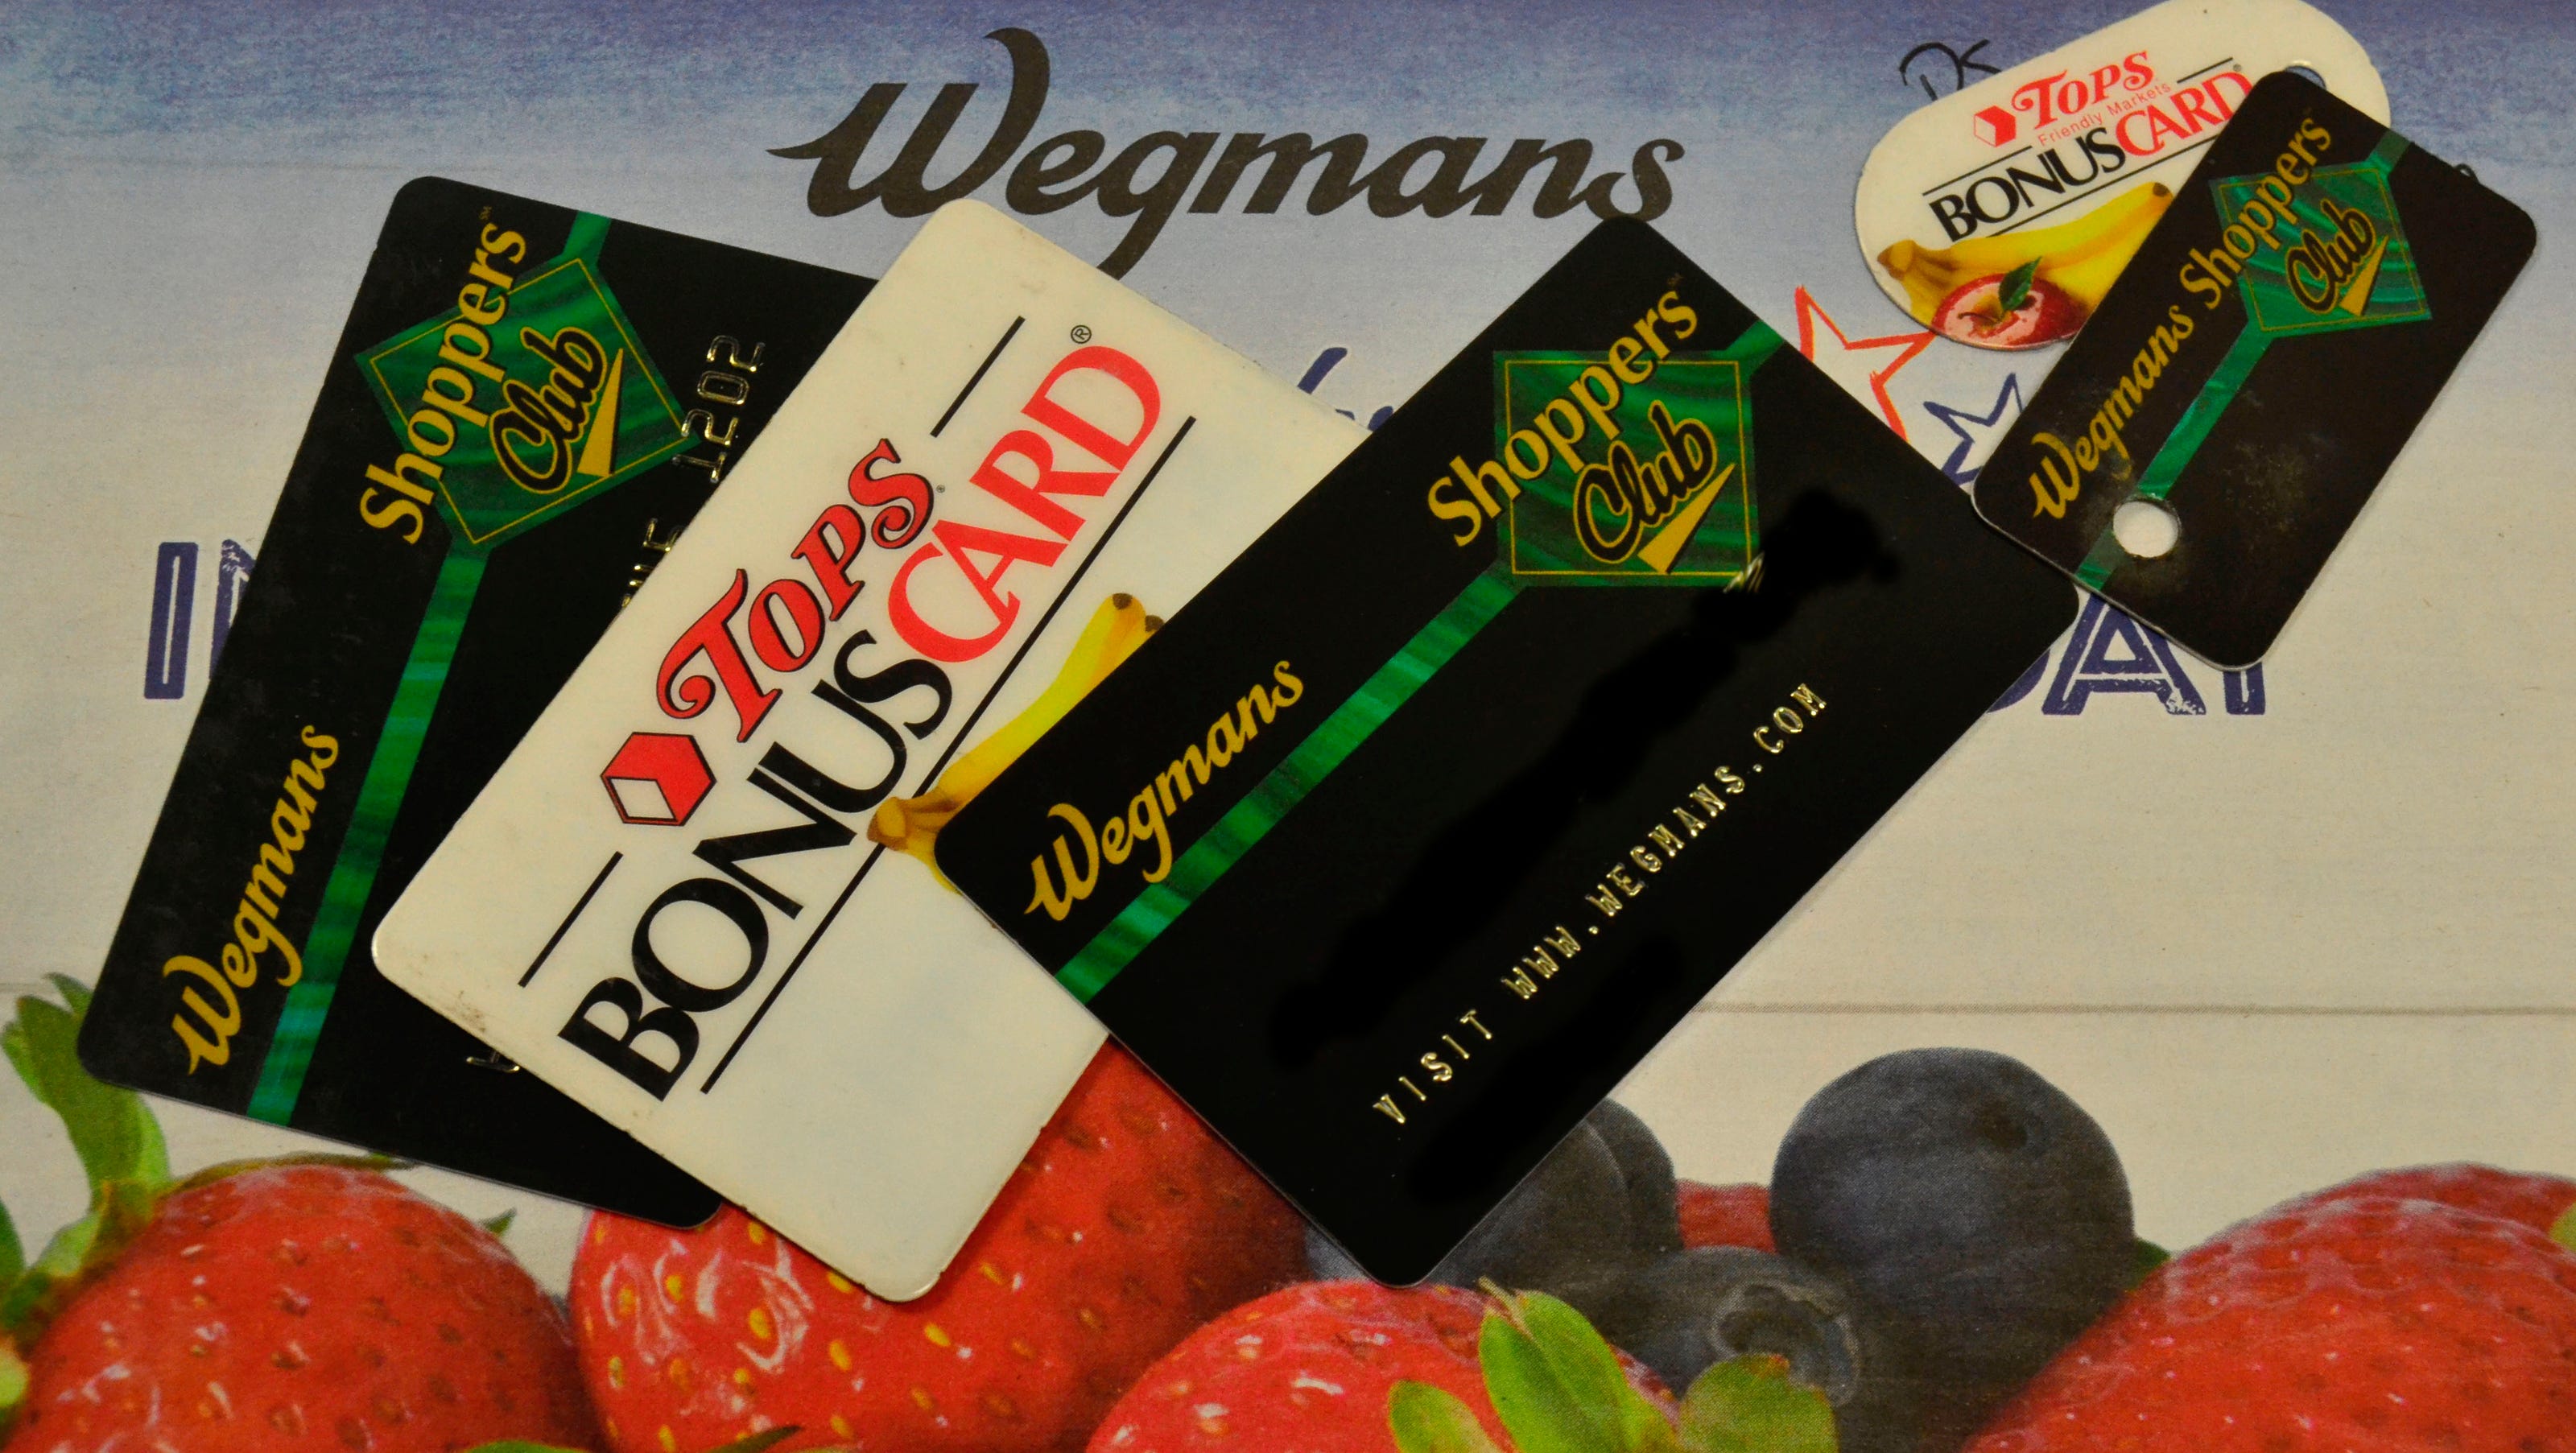 How Wegmans Tops Collect And Use Shoppers Data